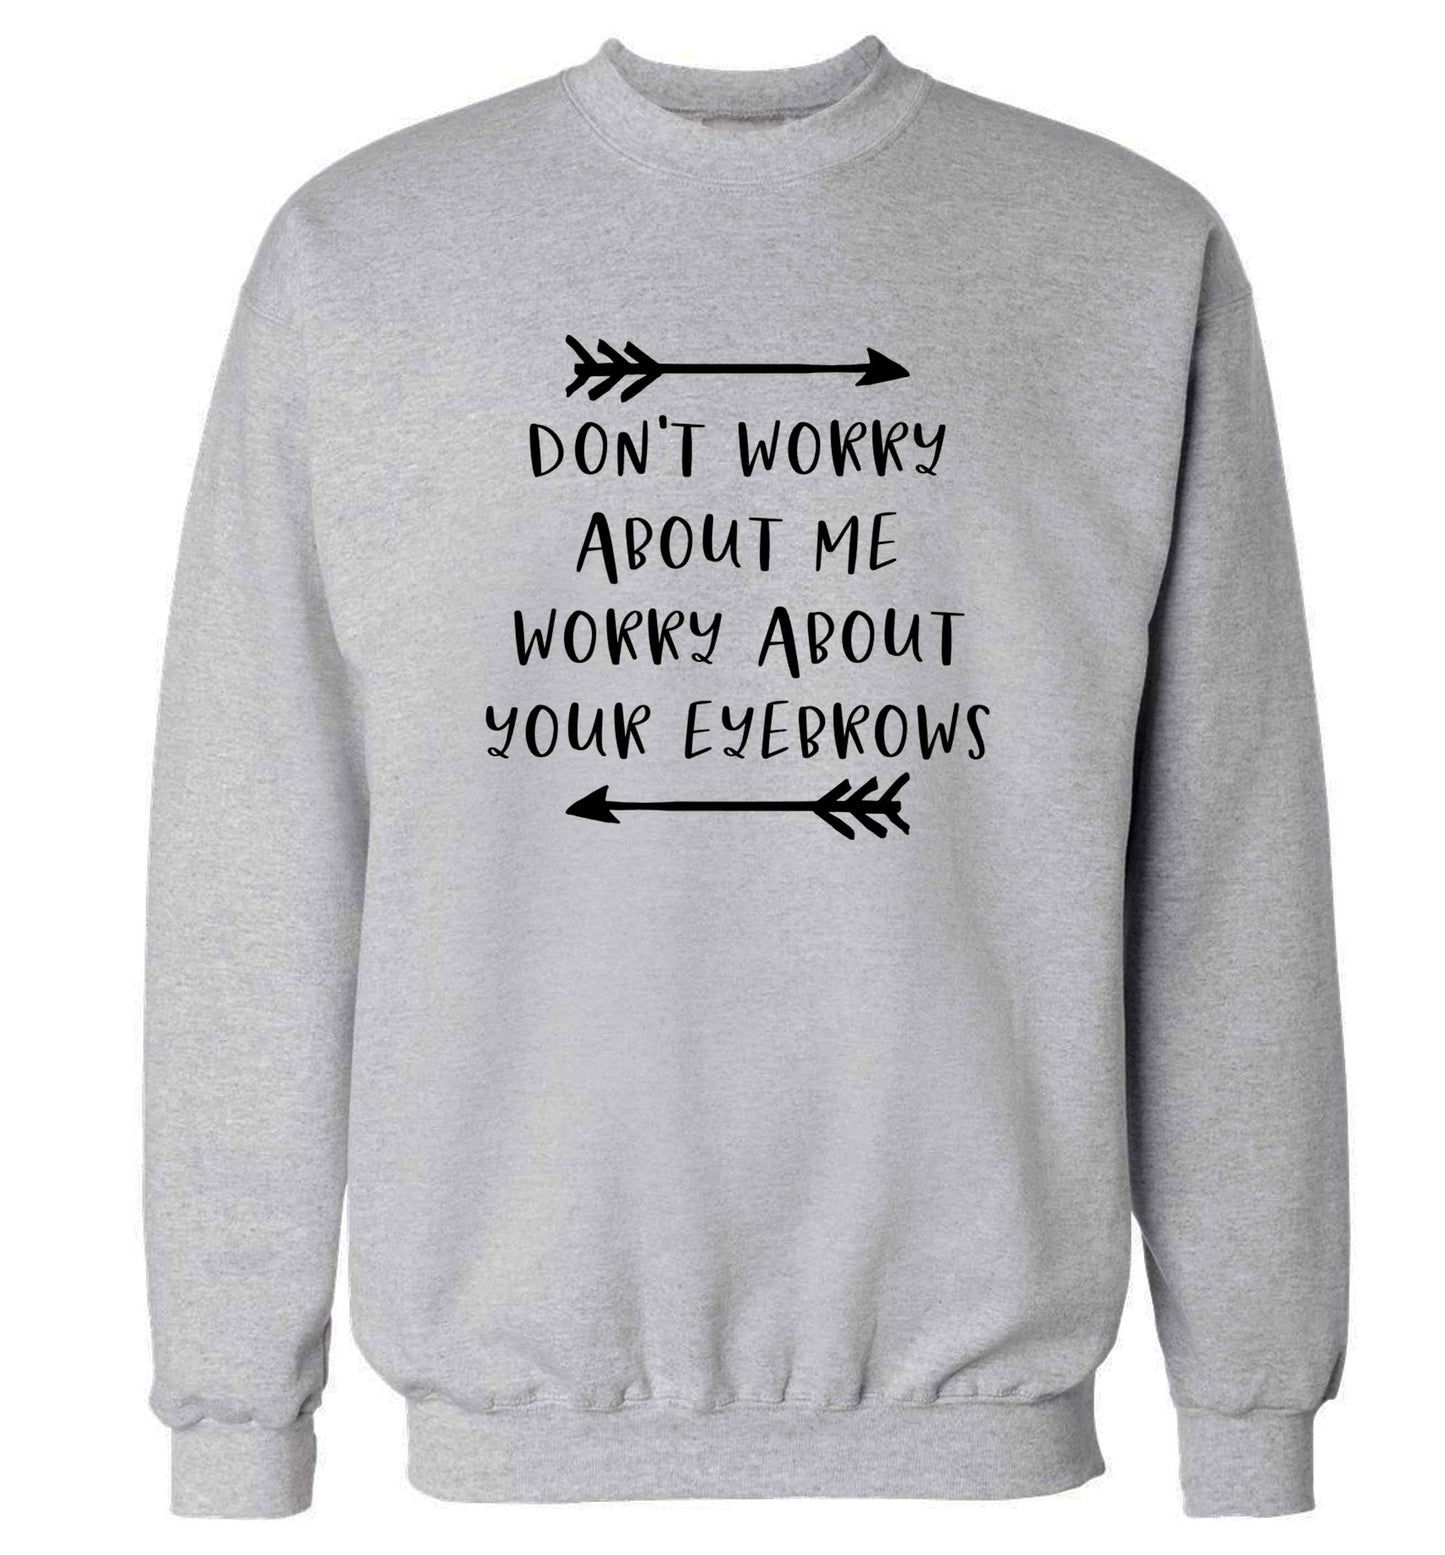 Don't worry about me worry about your eyebrows adult's unisex grey sweater 2XL